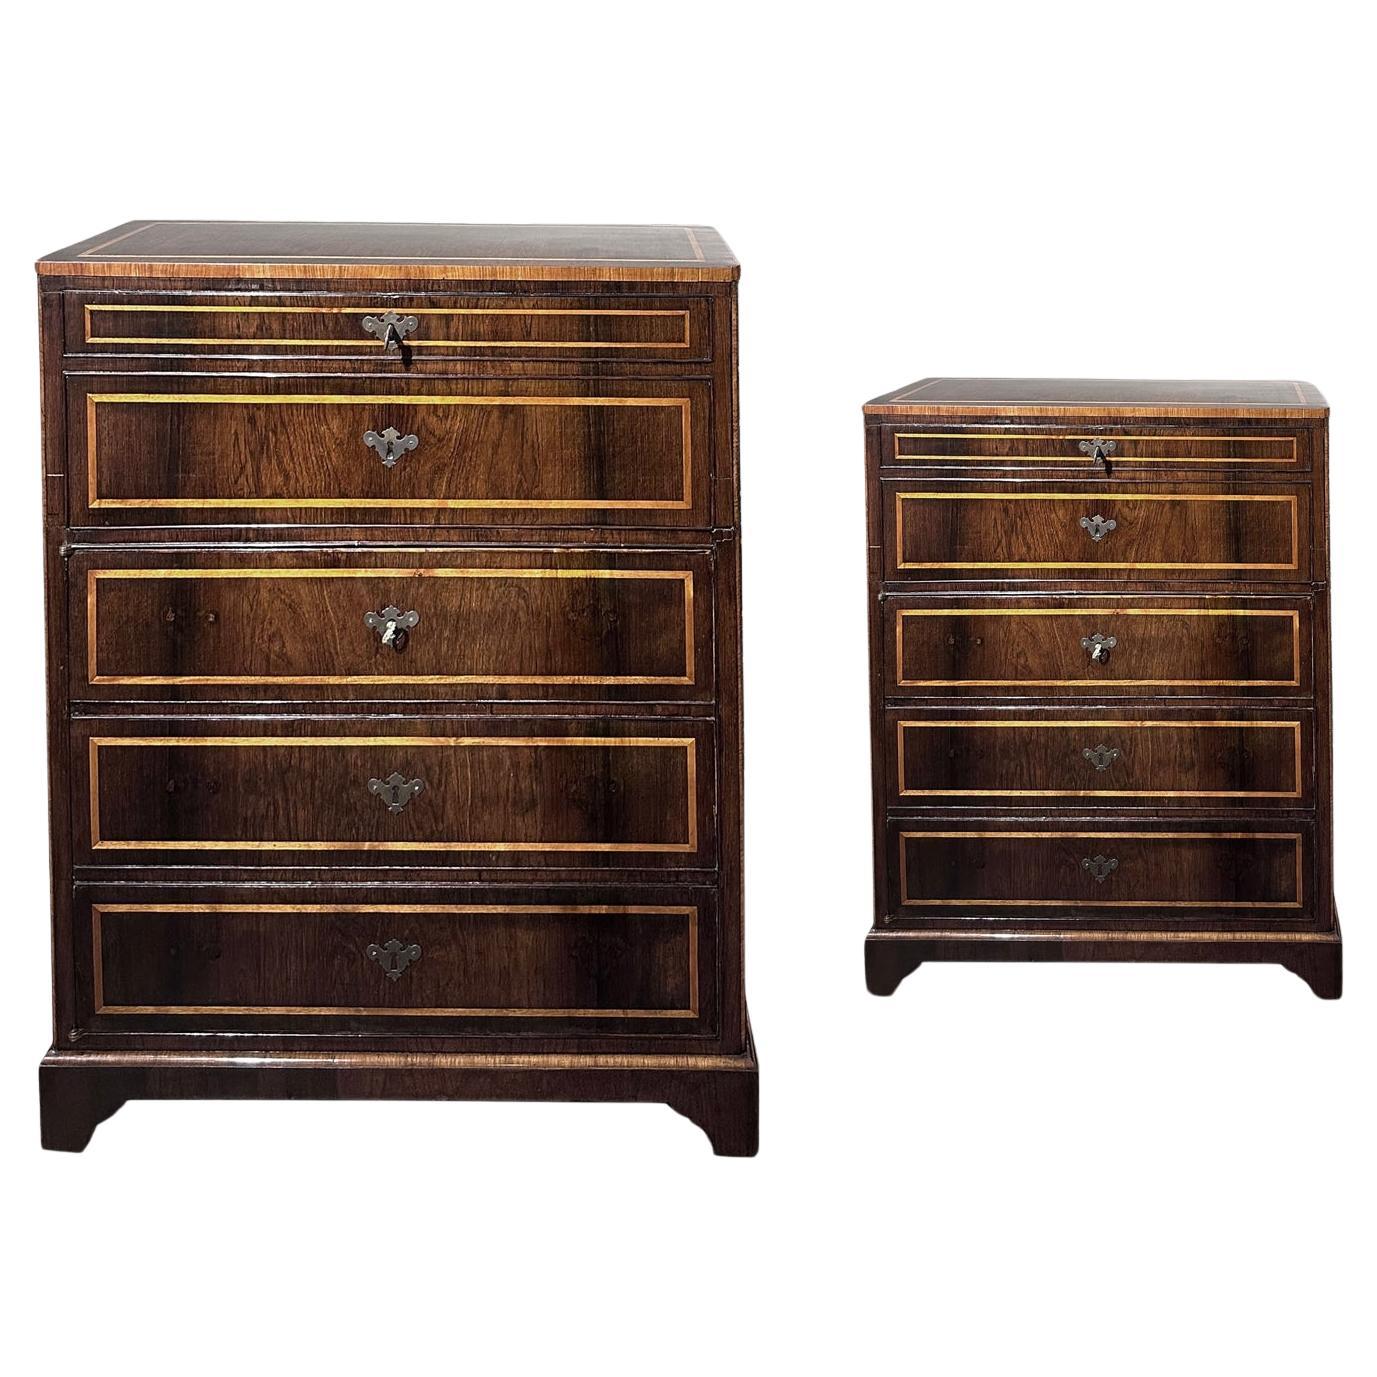 EARLY 19th CENTURY PAIR OF WRITE STANDING SIDEBOARDS 